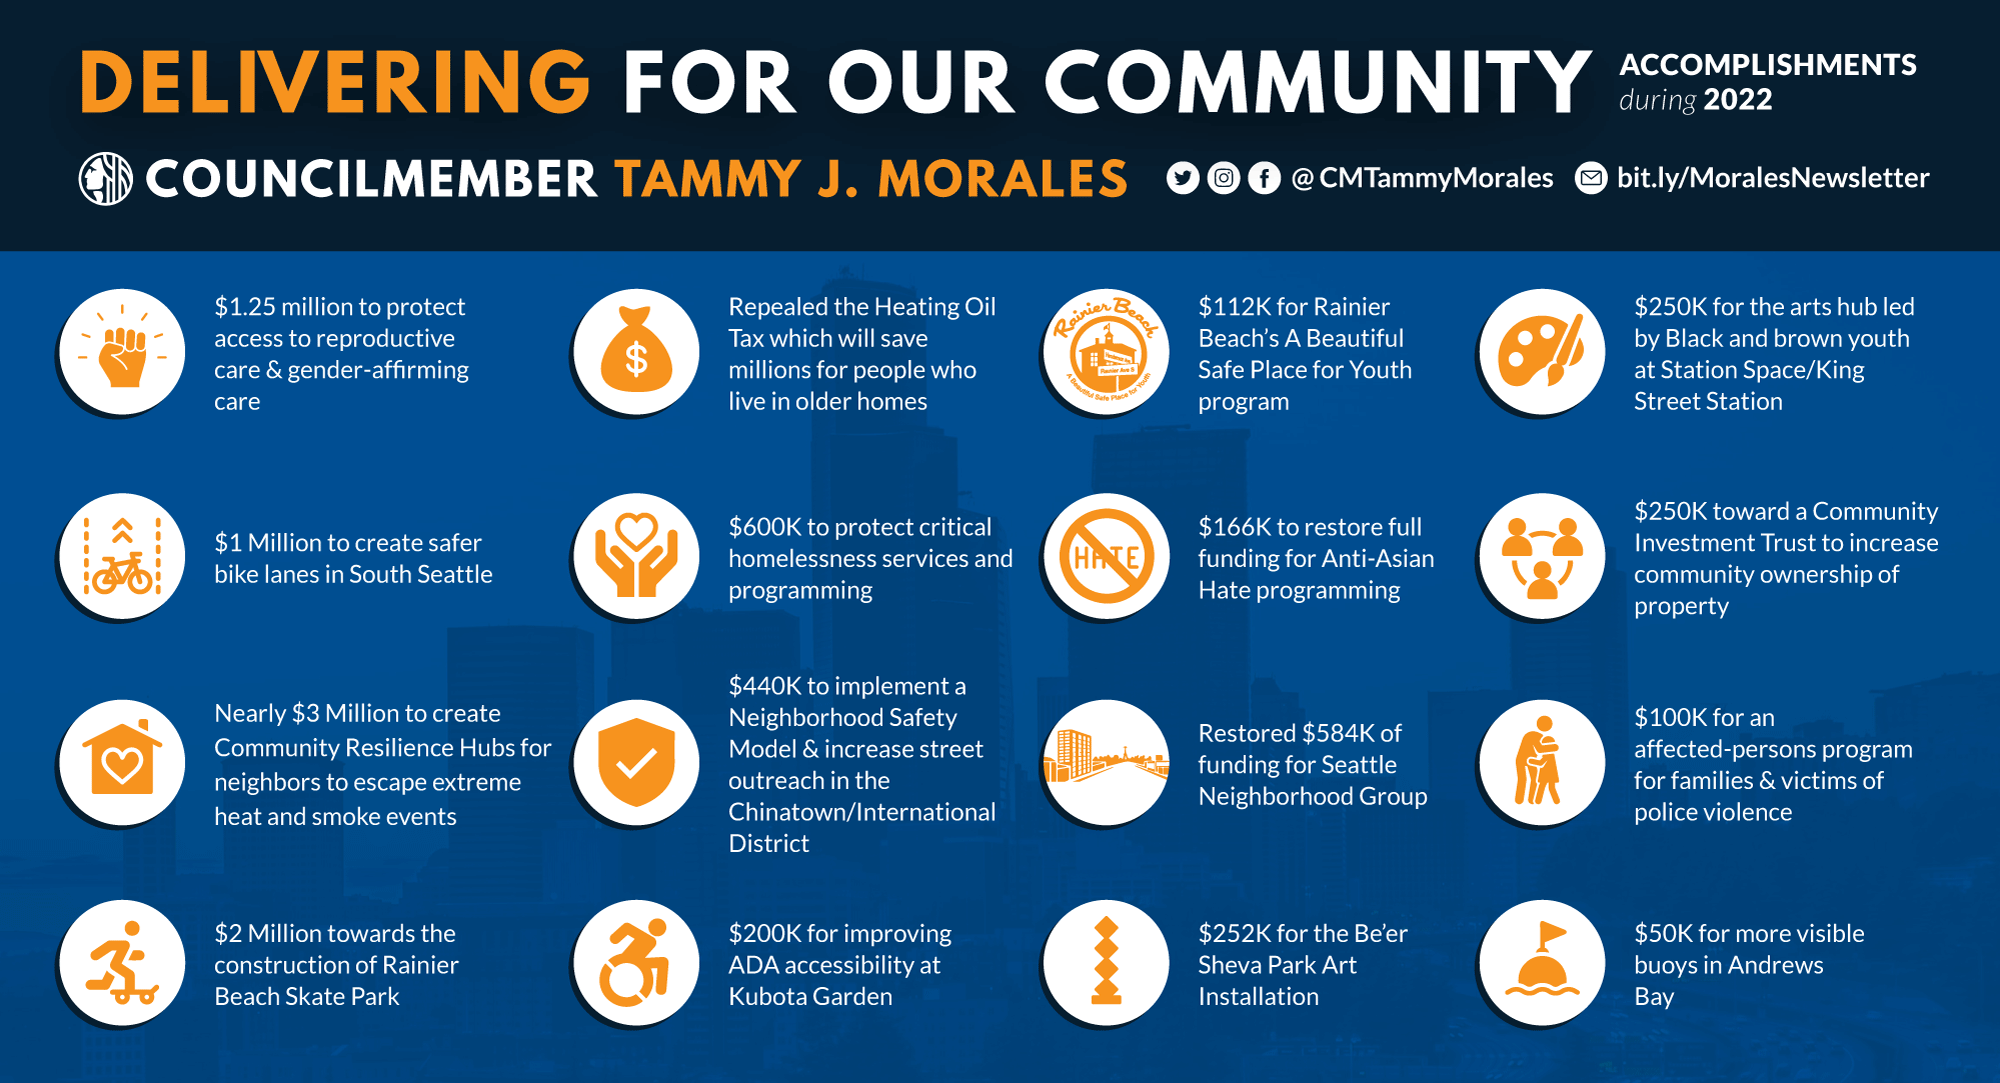 Councilmember Tammy J. Morales' Selected Accomplishments during 2022